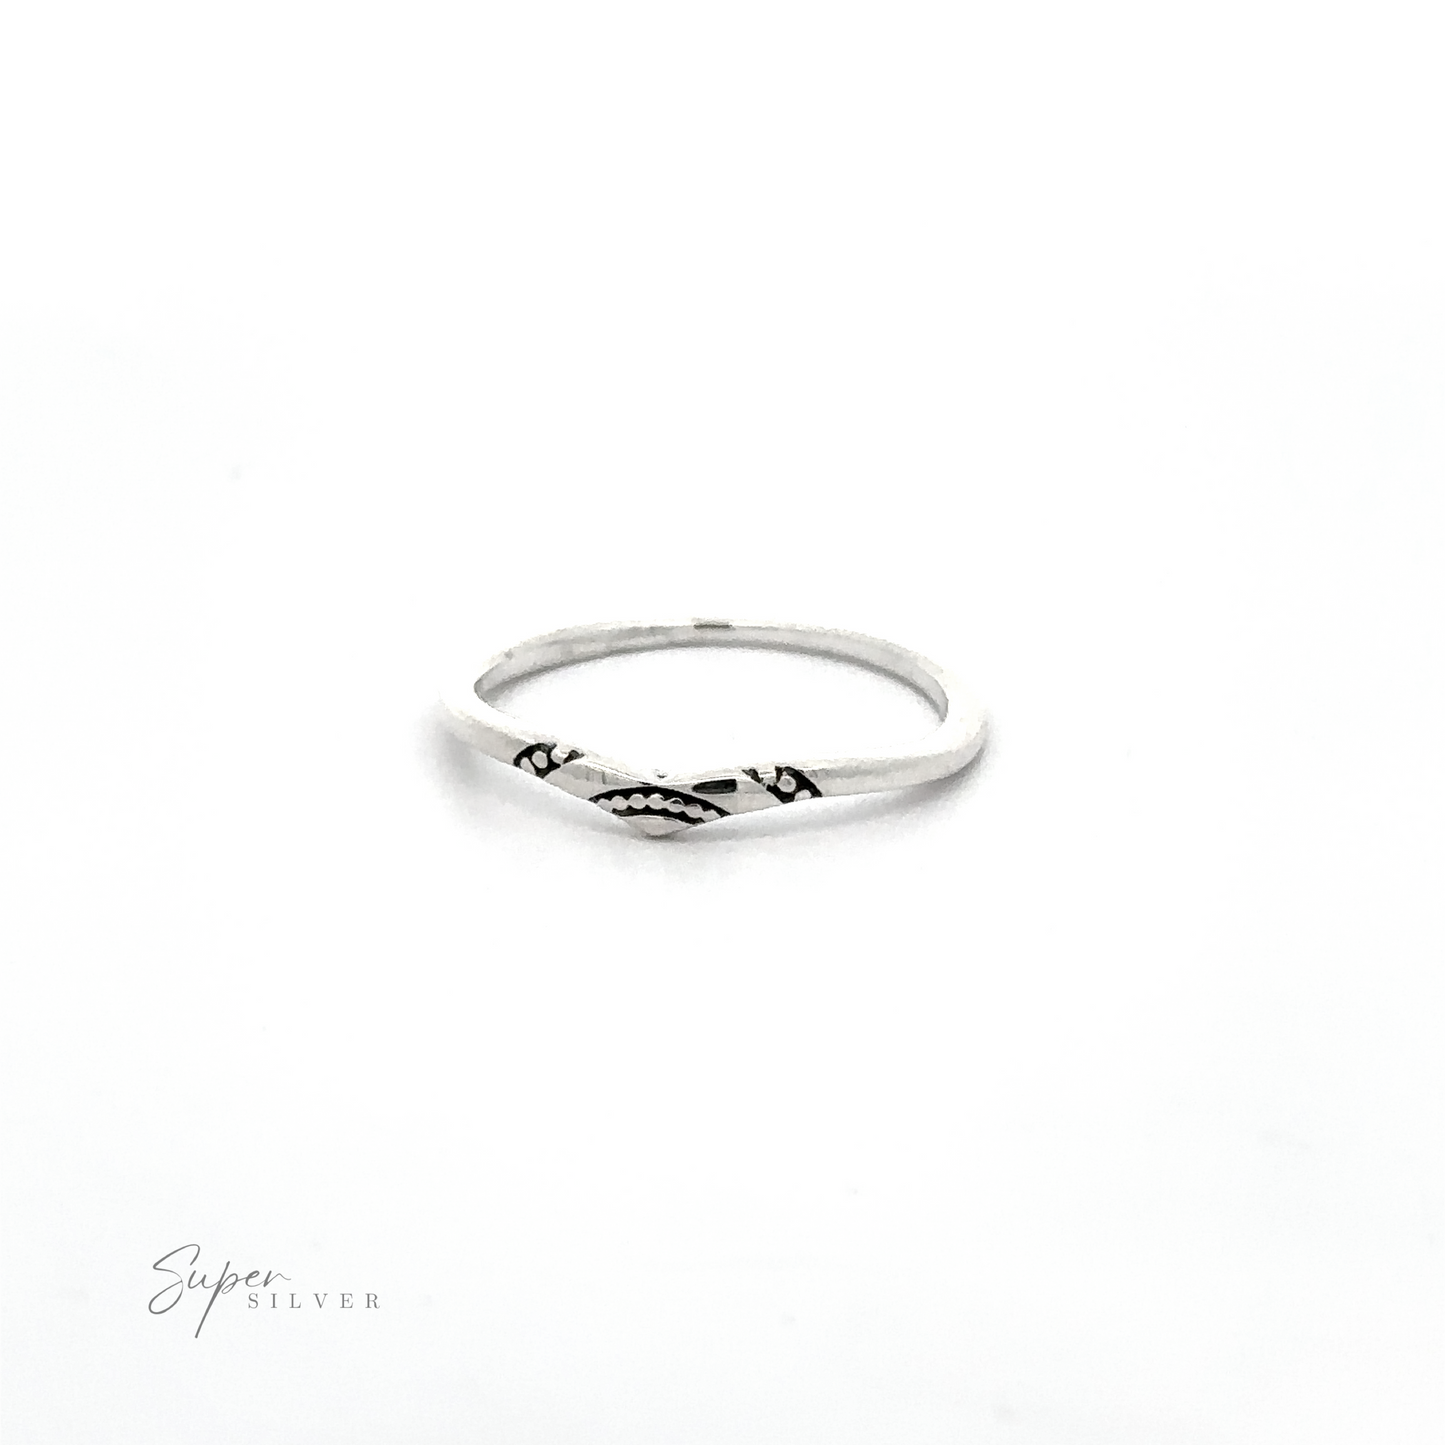 A Dainty Chevron Band With Etched Design, perfect for the versatile fashionista.